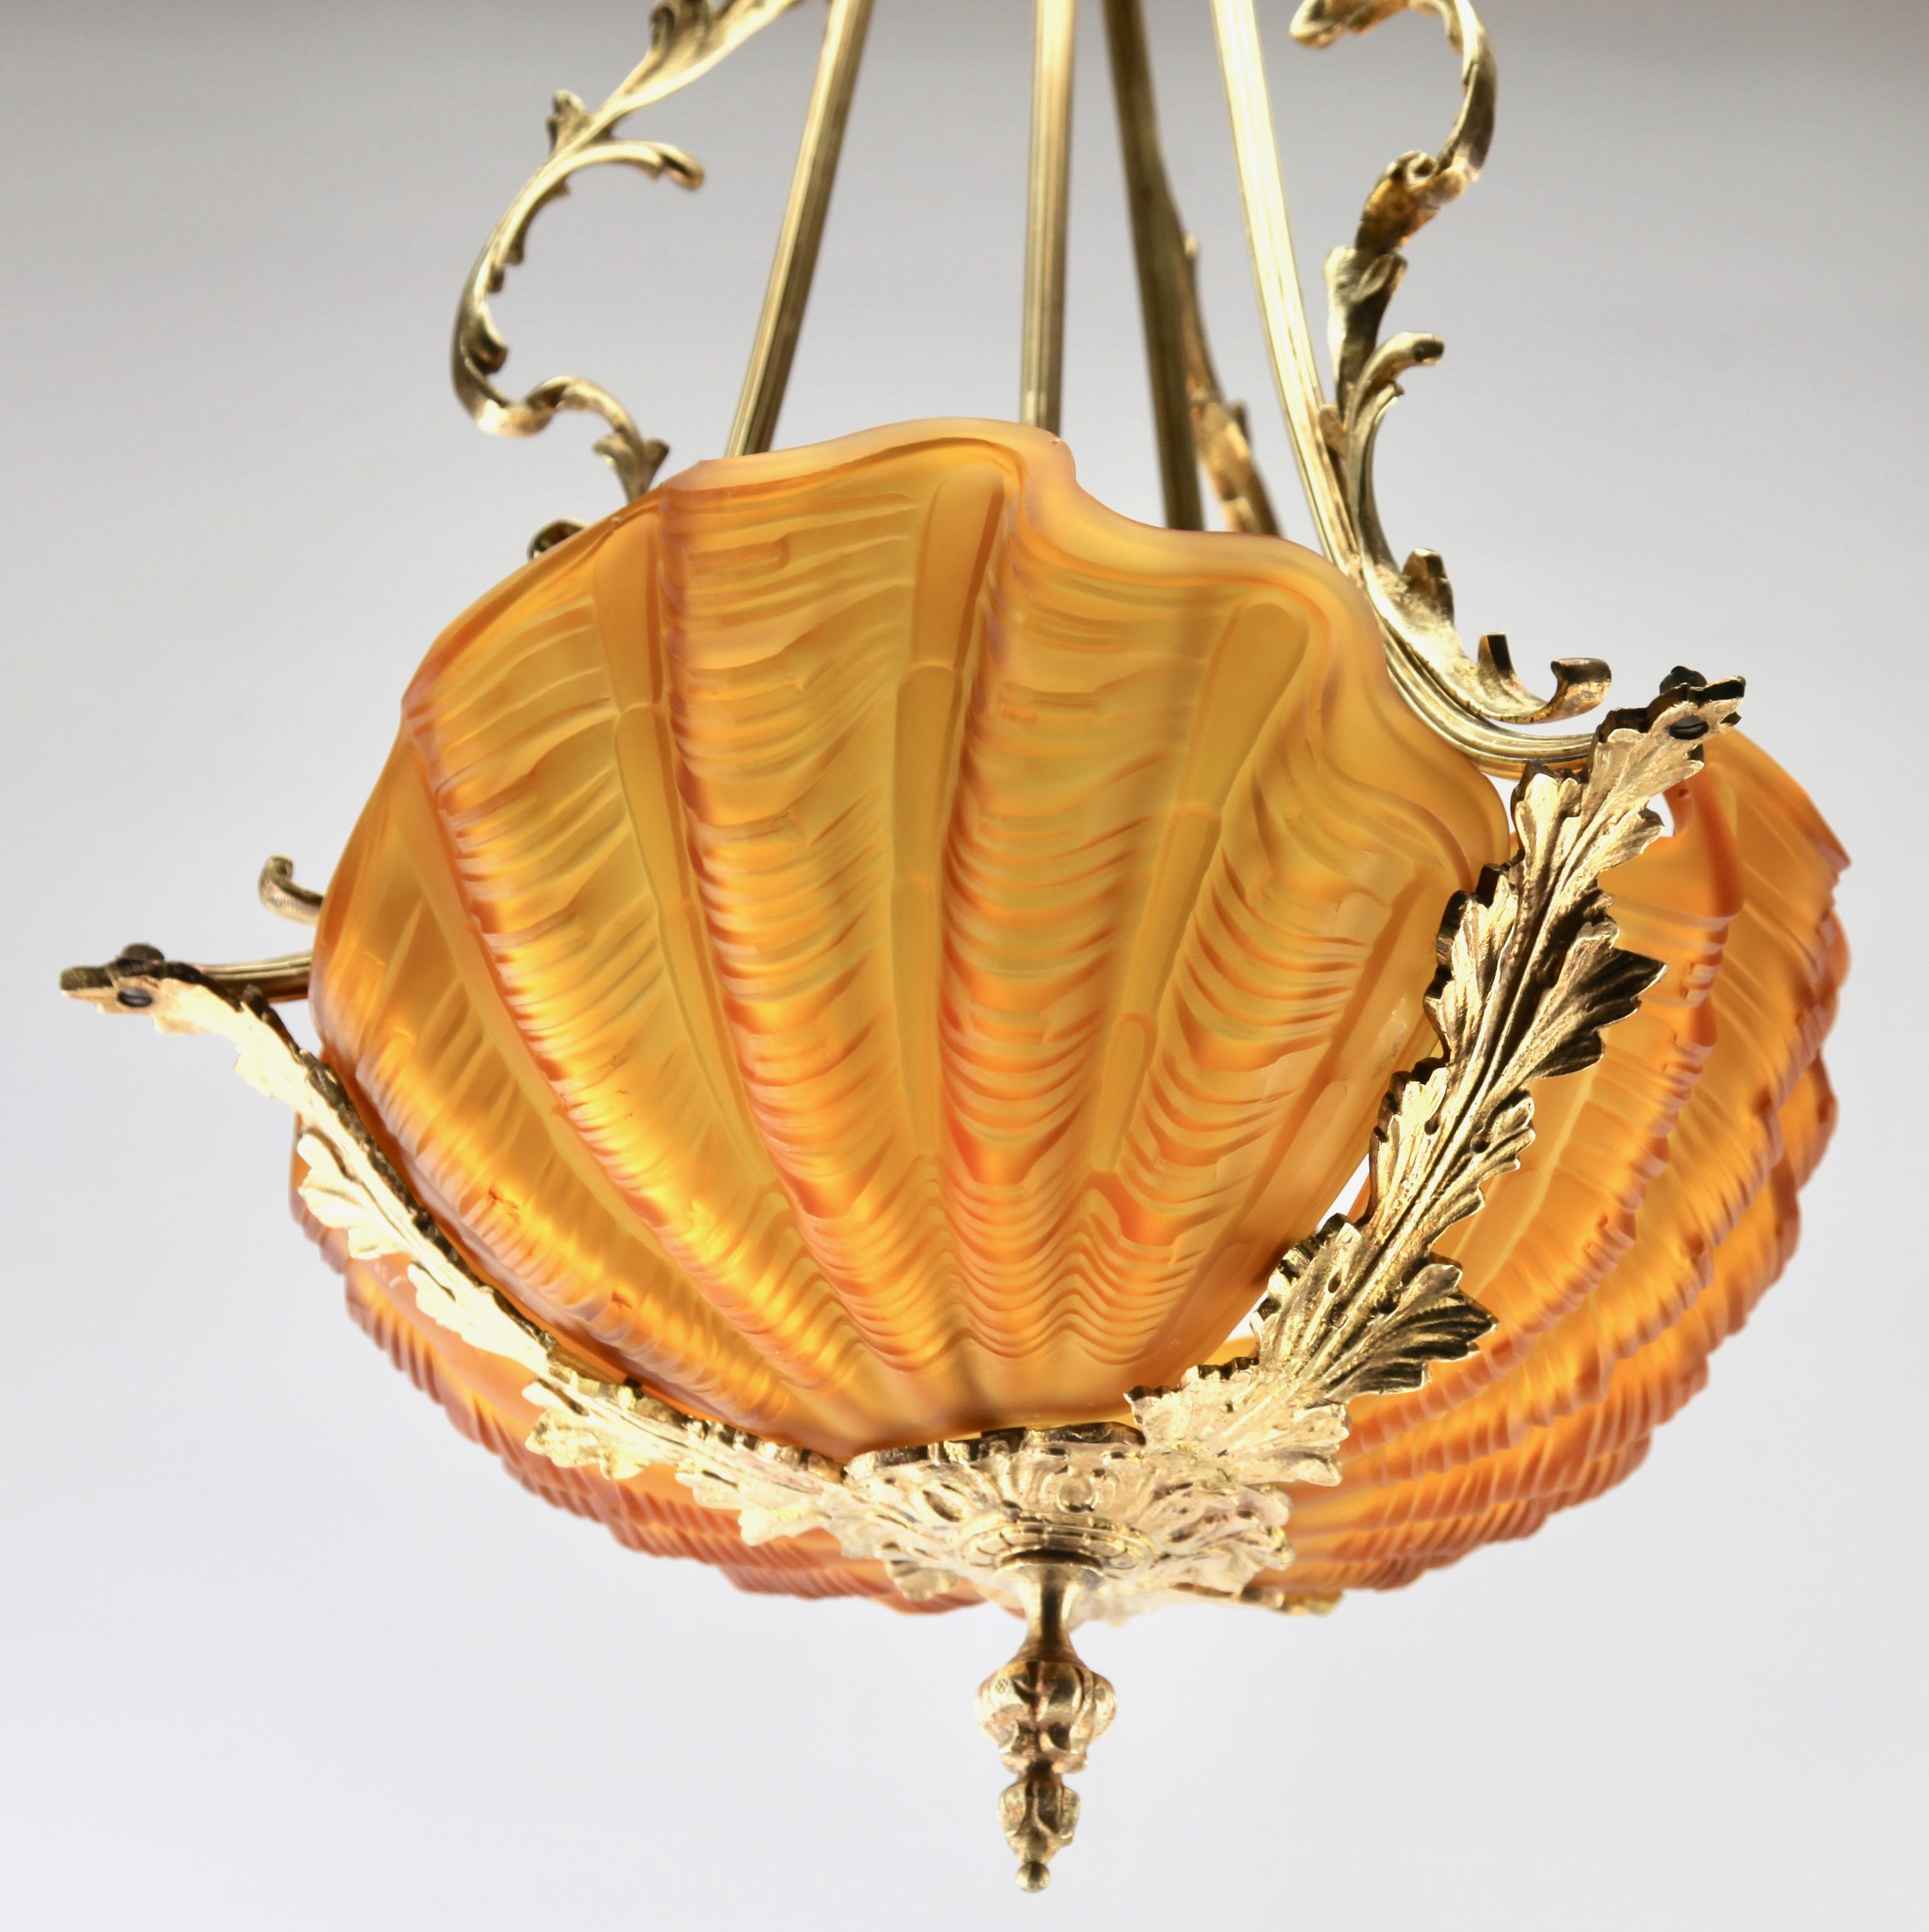 Three clam shells suspended between fronds of seaweed.
The shade is cast in pink opaque glass enhancing the shadow of the shell’s texture, and they are held in naturalistic framework of polished brass rococo scrolls representing fronds of